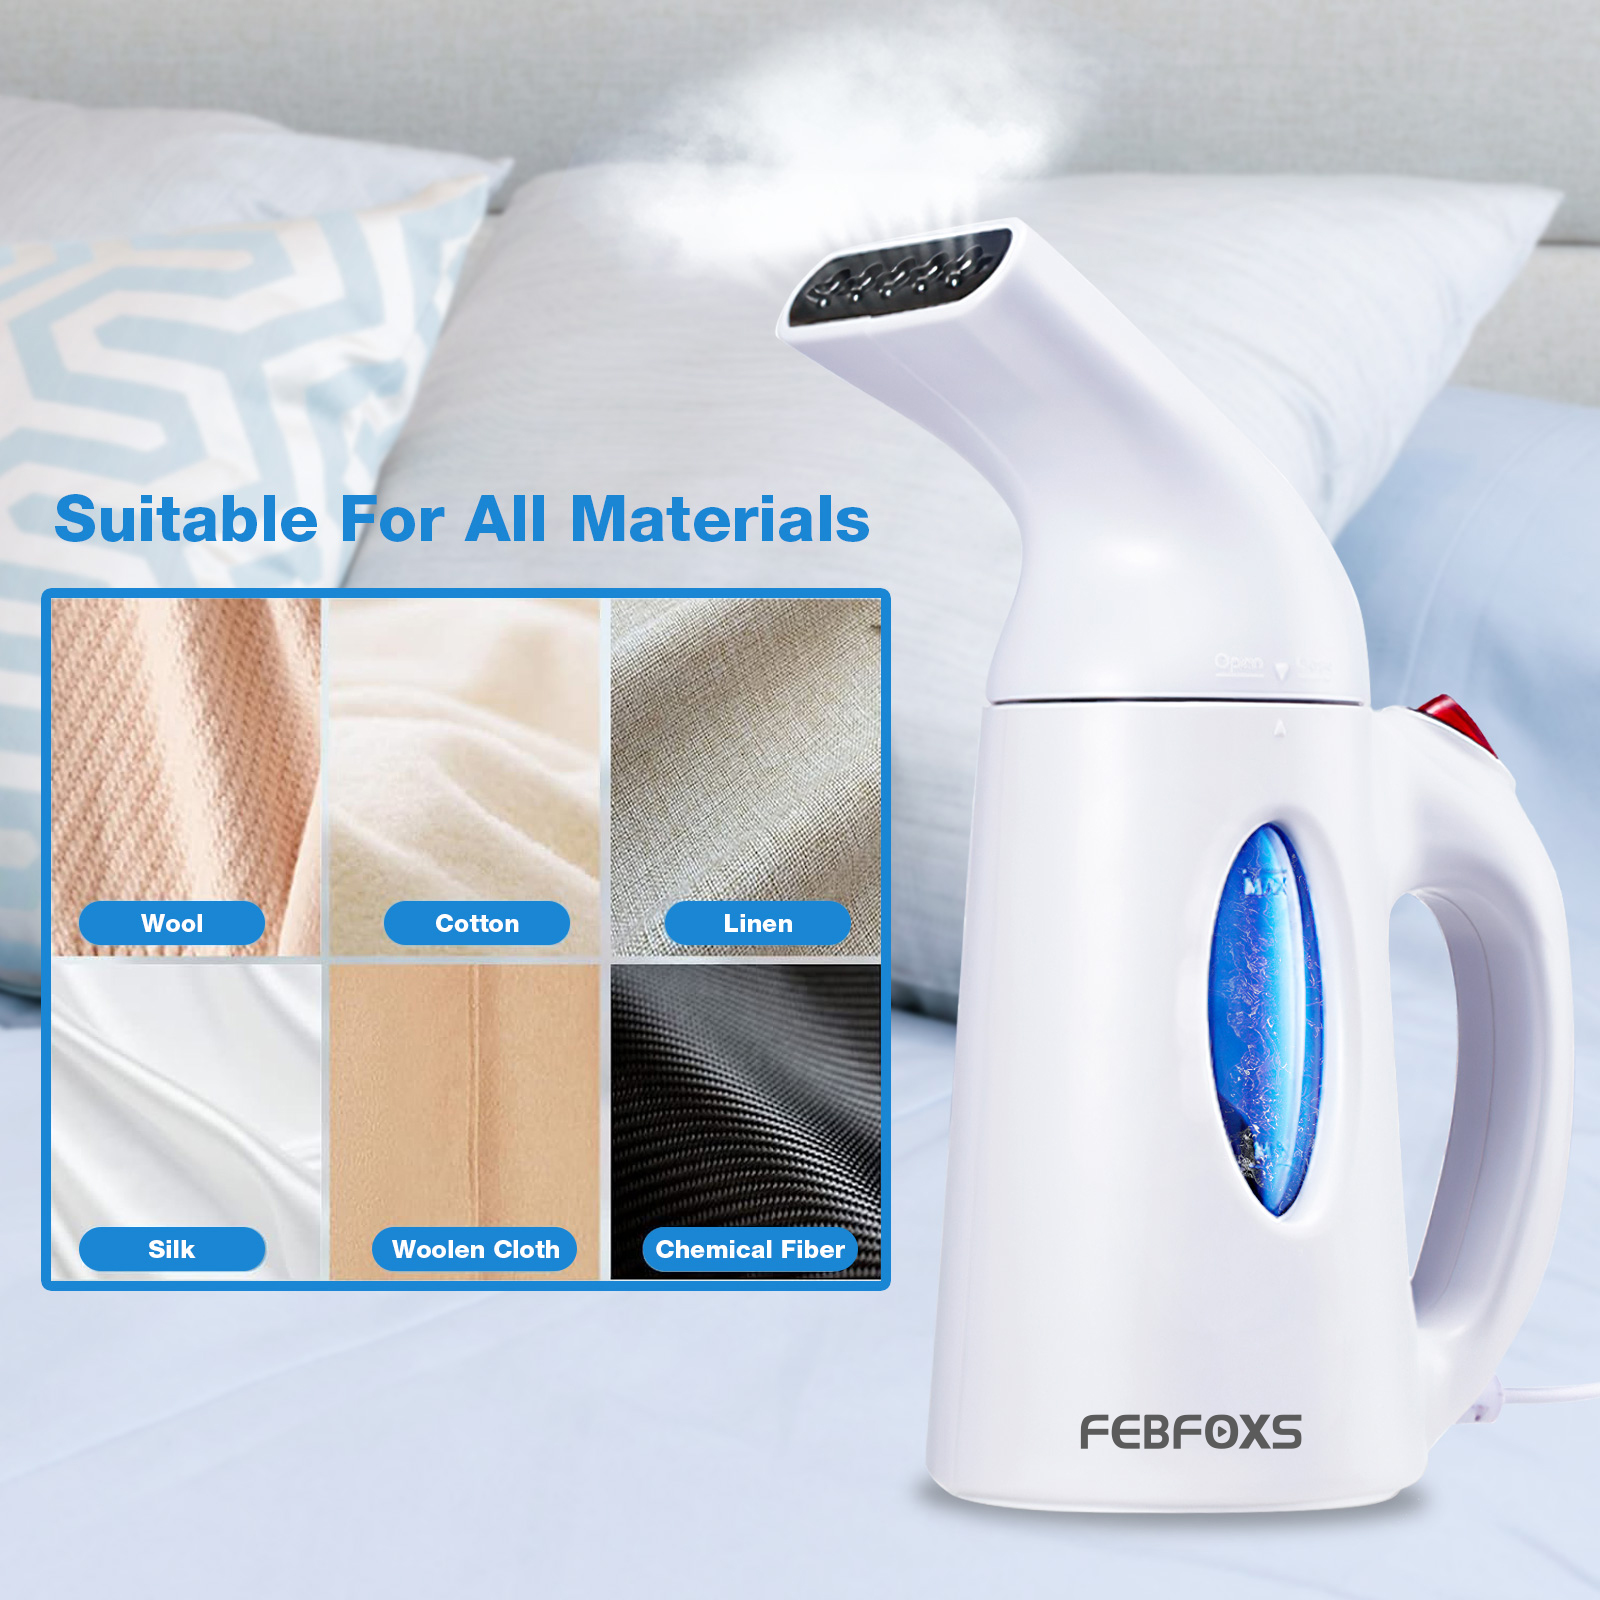 FEBFOXS Steamer for Clothes,700w Portable Garment Steamer,Auto Shut-off Function,Wrinkles/Steam/Soften/Clean/Sterilize,White - image 2 of 8